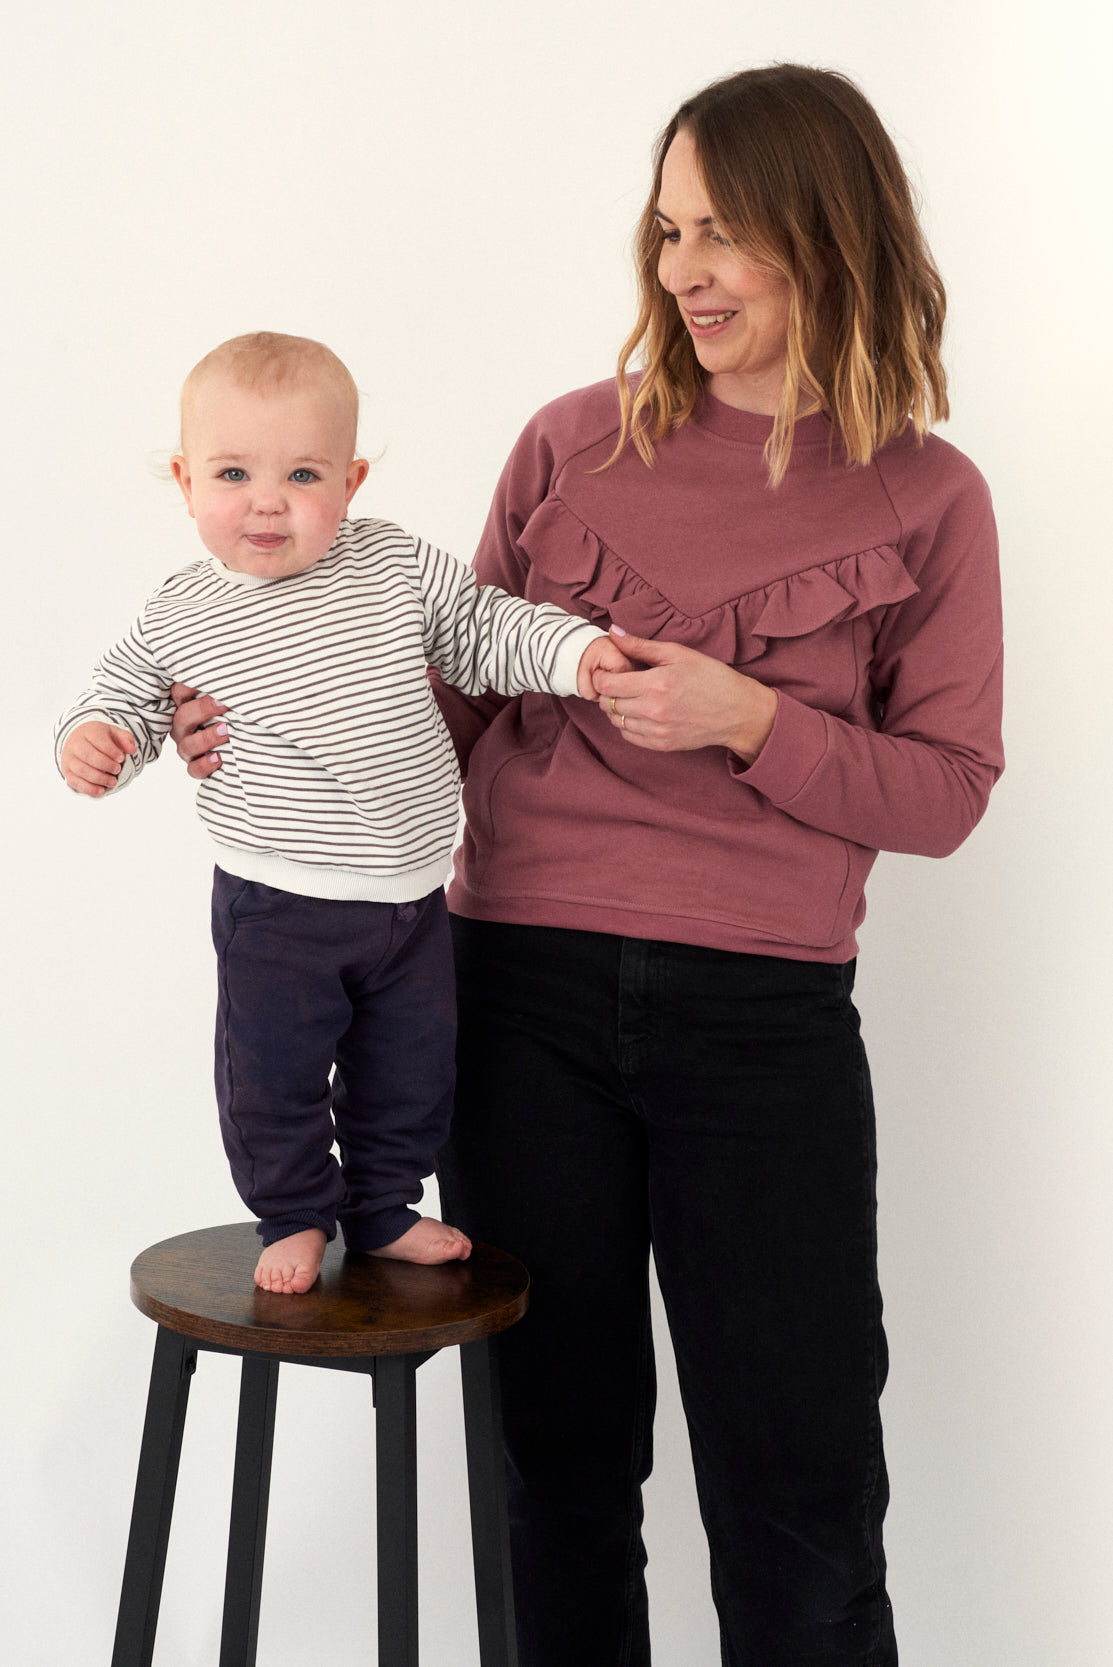 Breastfeeding Sweatshirt in Rose. Fashion meets functionality with this beautiful feminine style breastfeeding sweatshirt for new mums. Organic cotton soft against both yours and baby's skin. Concealed zips under the ruffle, open for perfect feeding access for your baby.